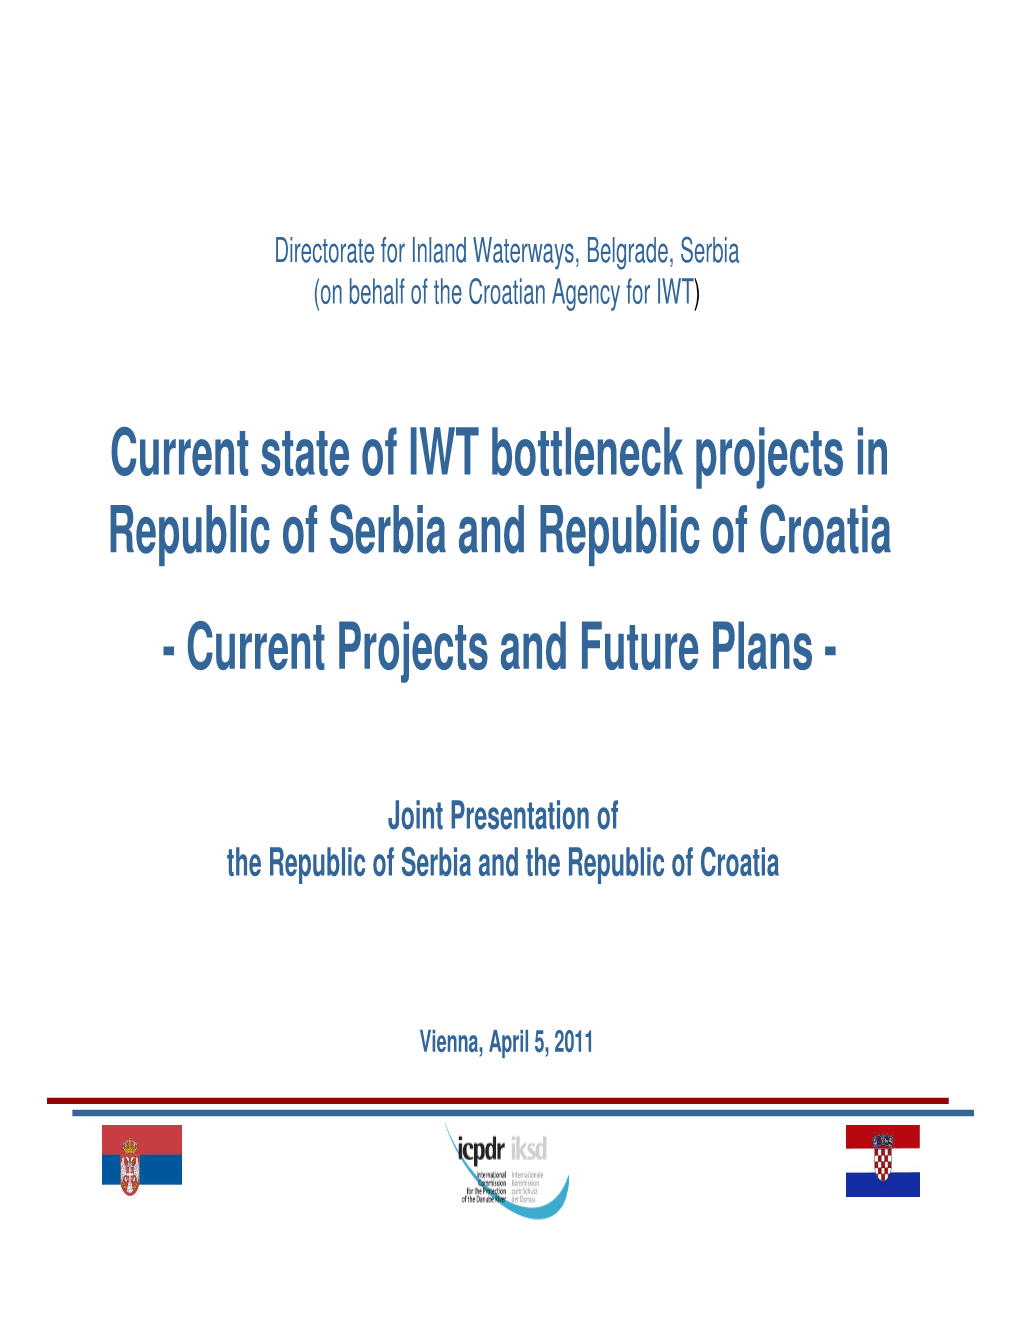 Current State of IWT Bottleneck Projects in Republic of Serbia and Republic of Croatia - Current Projects and Future Plans